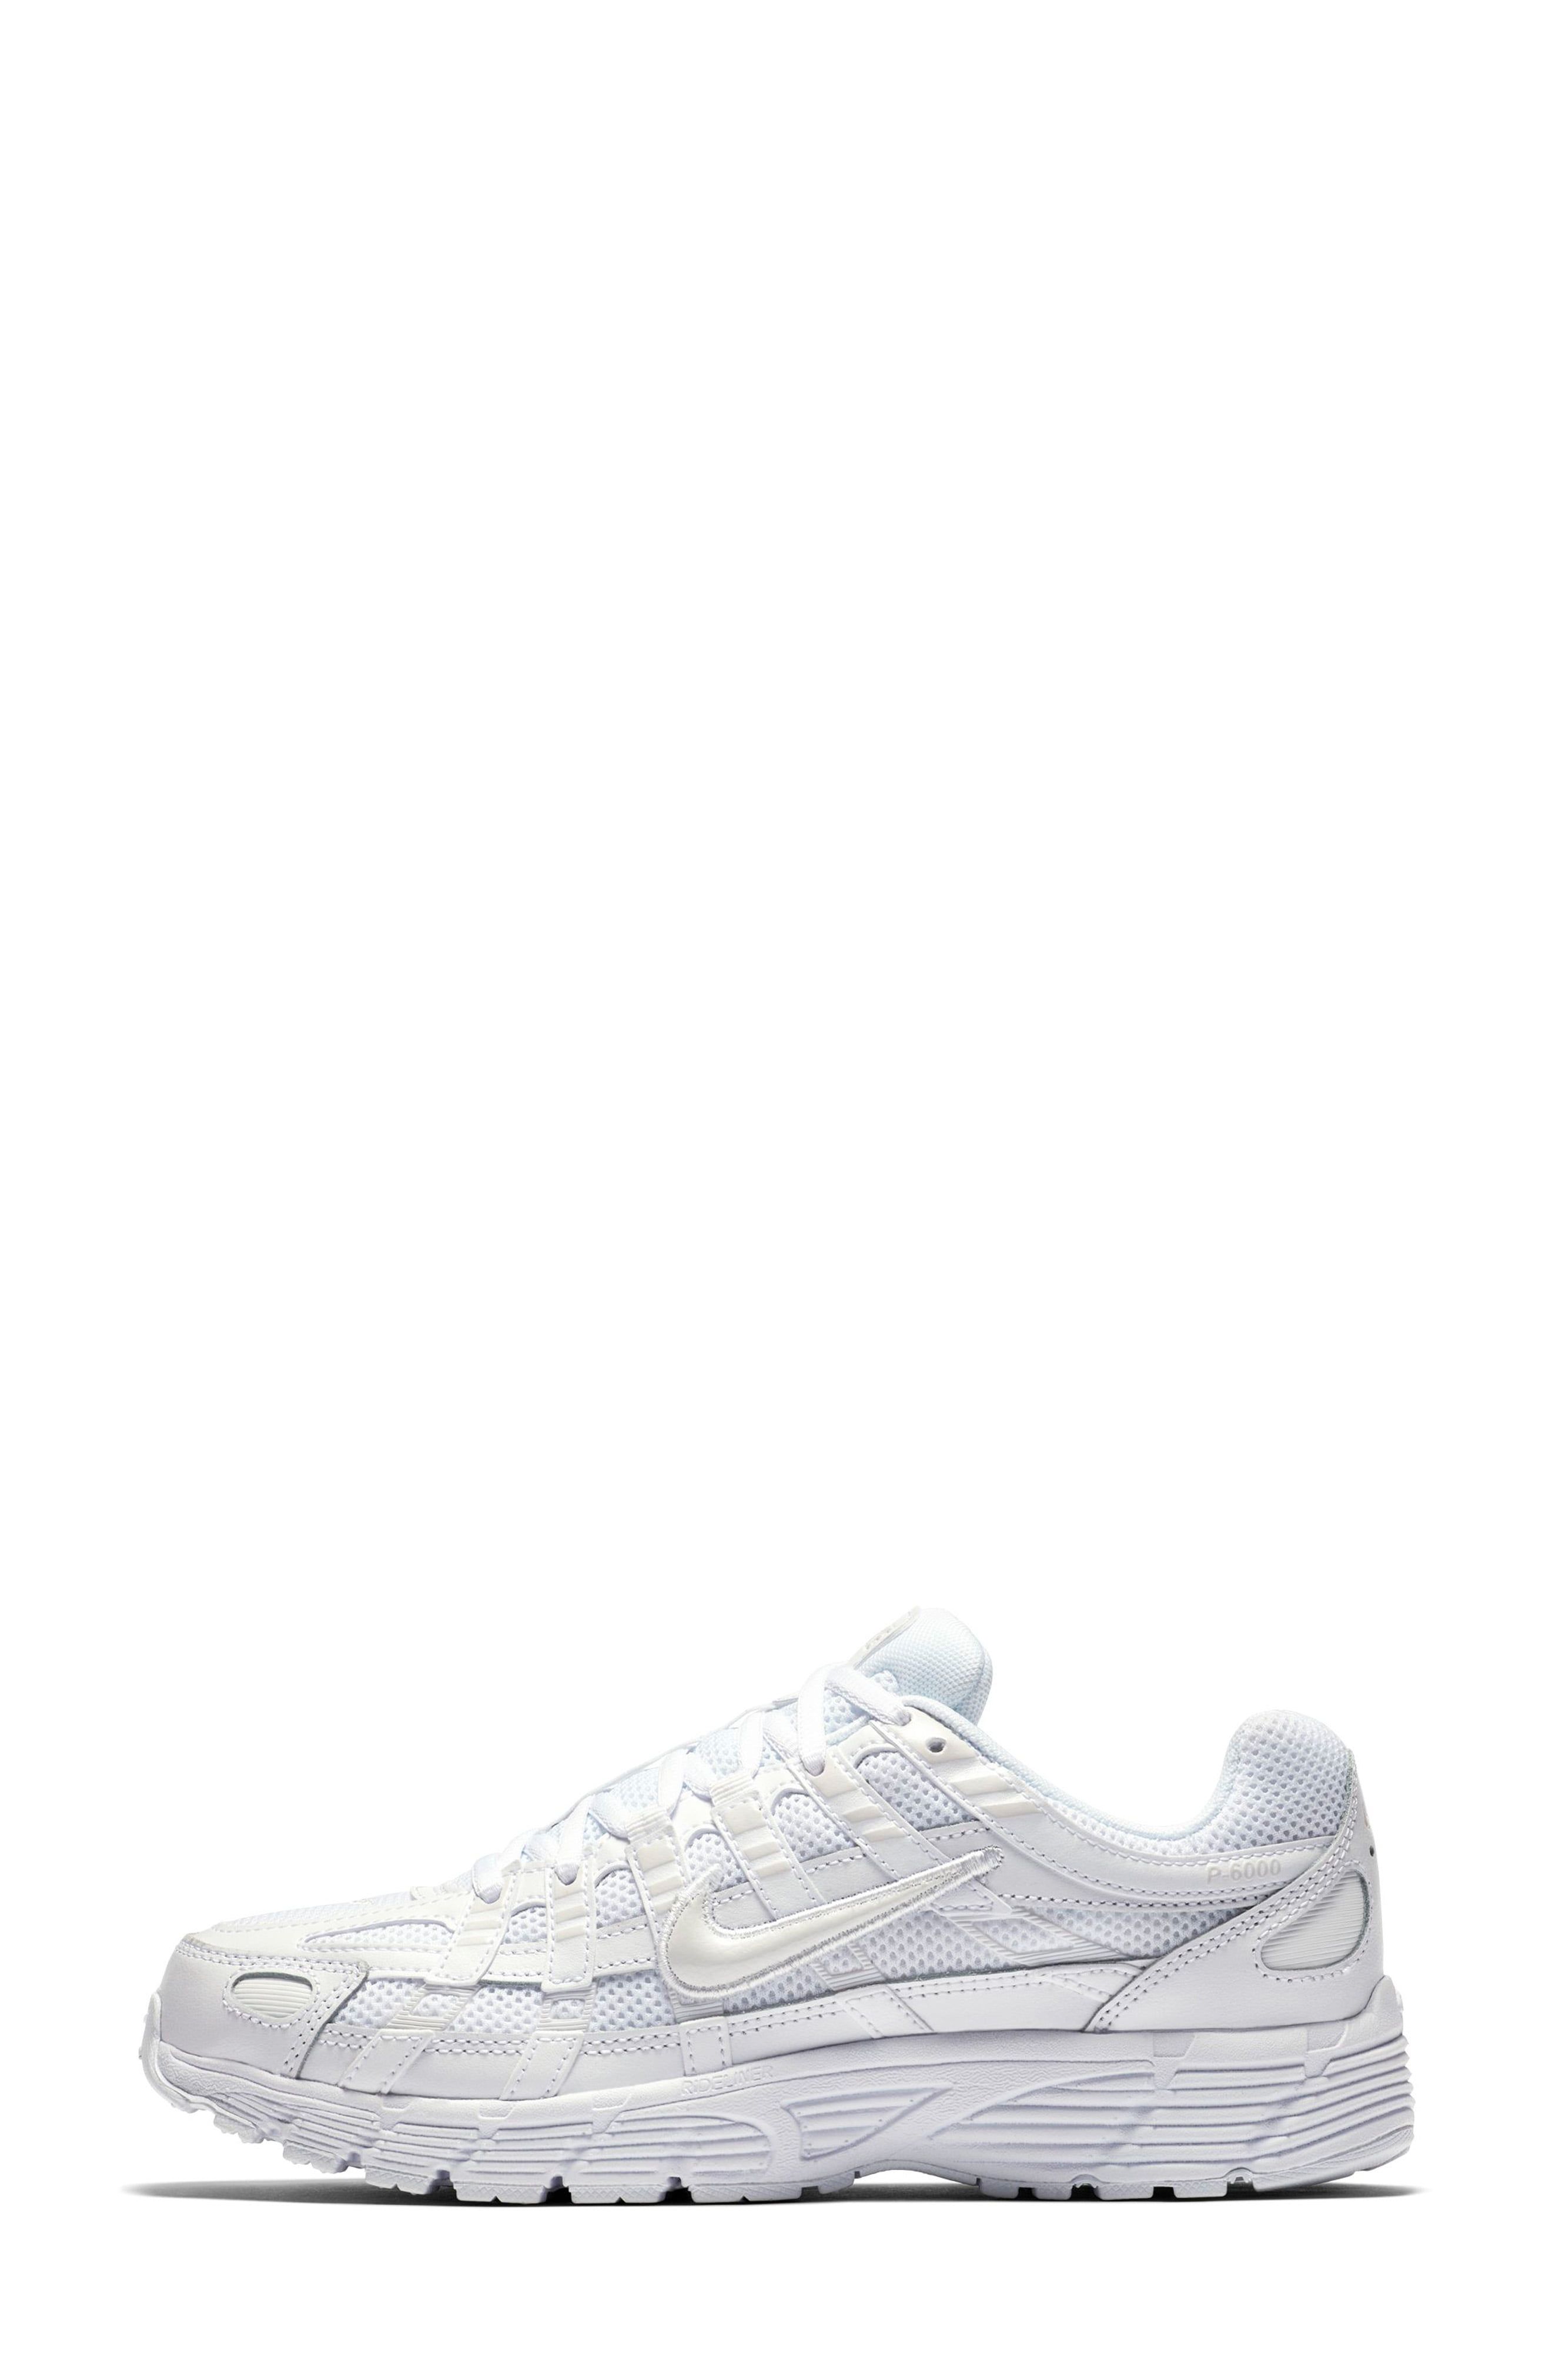 cool white runners